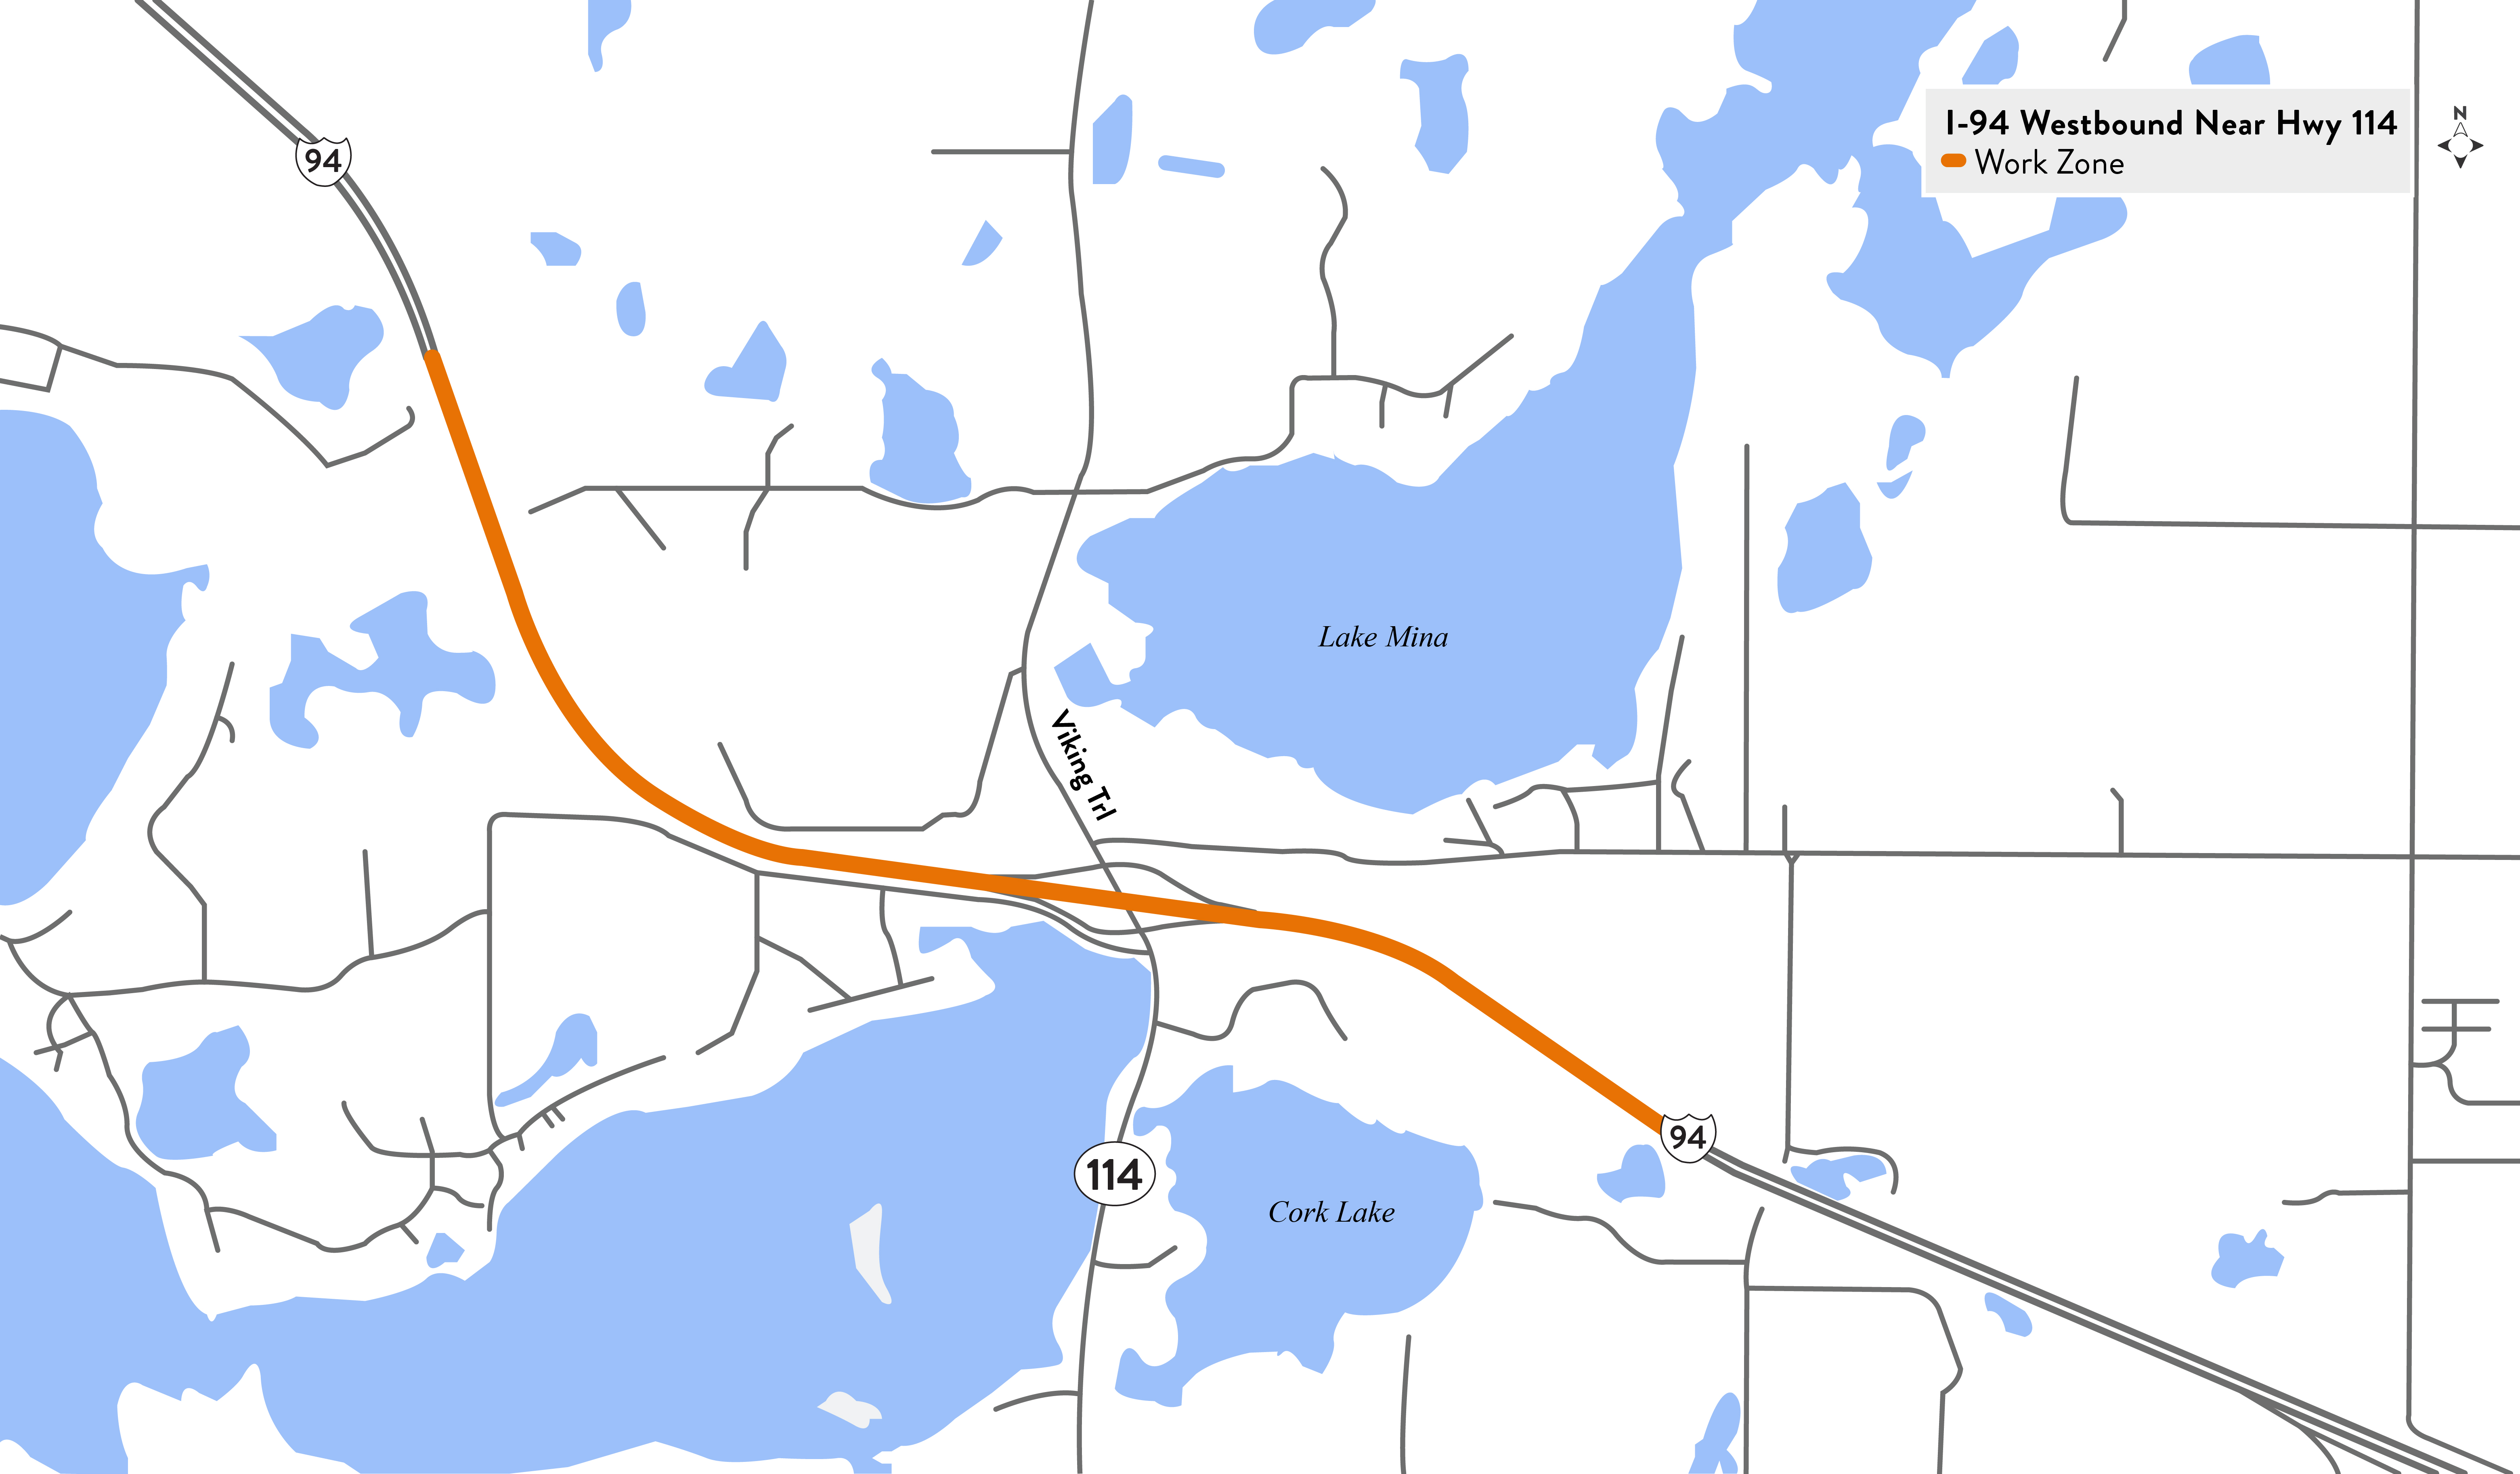 Map shows work zone for I-94 westbound concrete resurfacing project near Highway 114 west of Alexandria